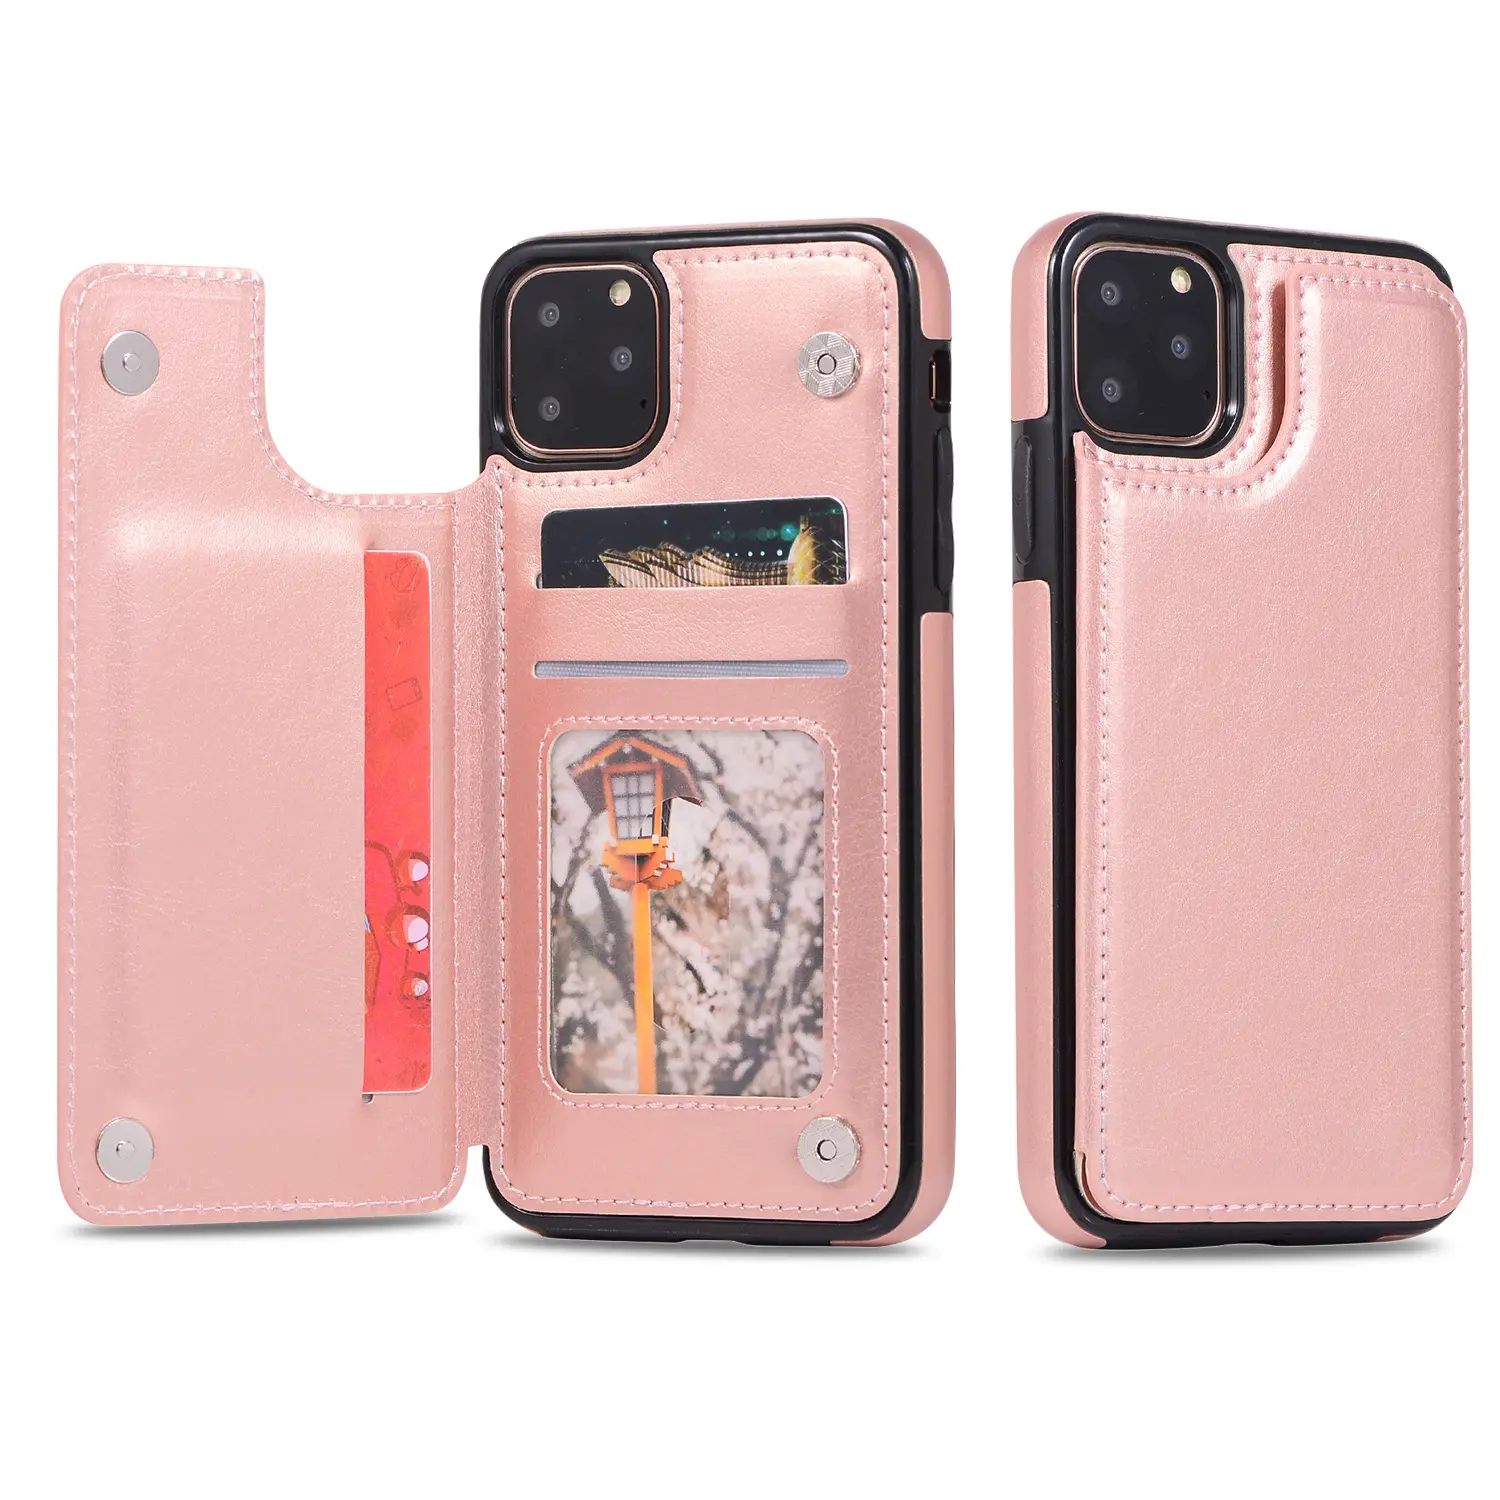 Pu Leather Phone Wallet Card Pockets Back Flip Cover Wallet Phone Case for iPhone 11 Mobile Phone Bags & Cases Motorola